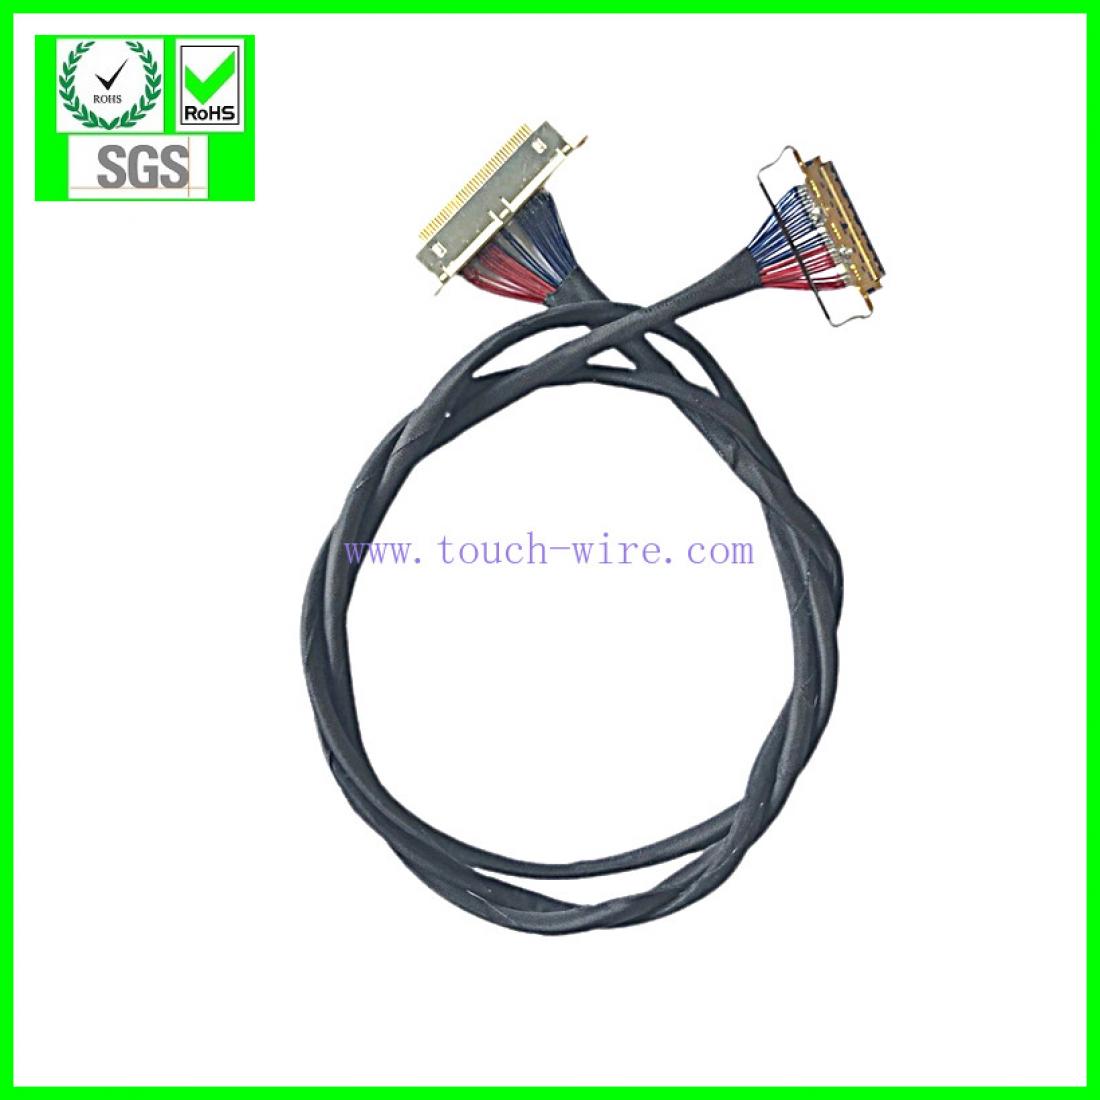 LVDS CABLE IPEX 20453 with pull bar and aces 88441,UL10005 40#/36# micro coaxial cable 